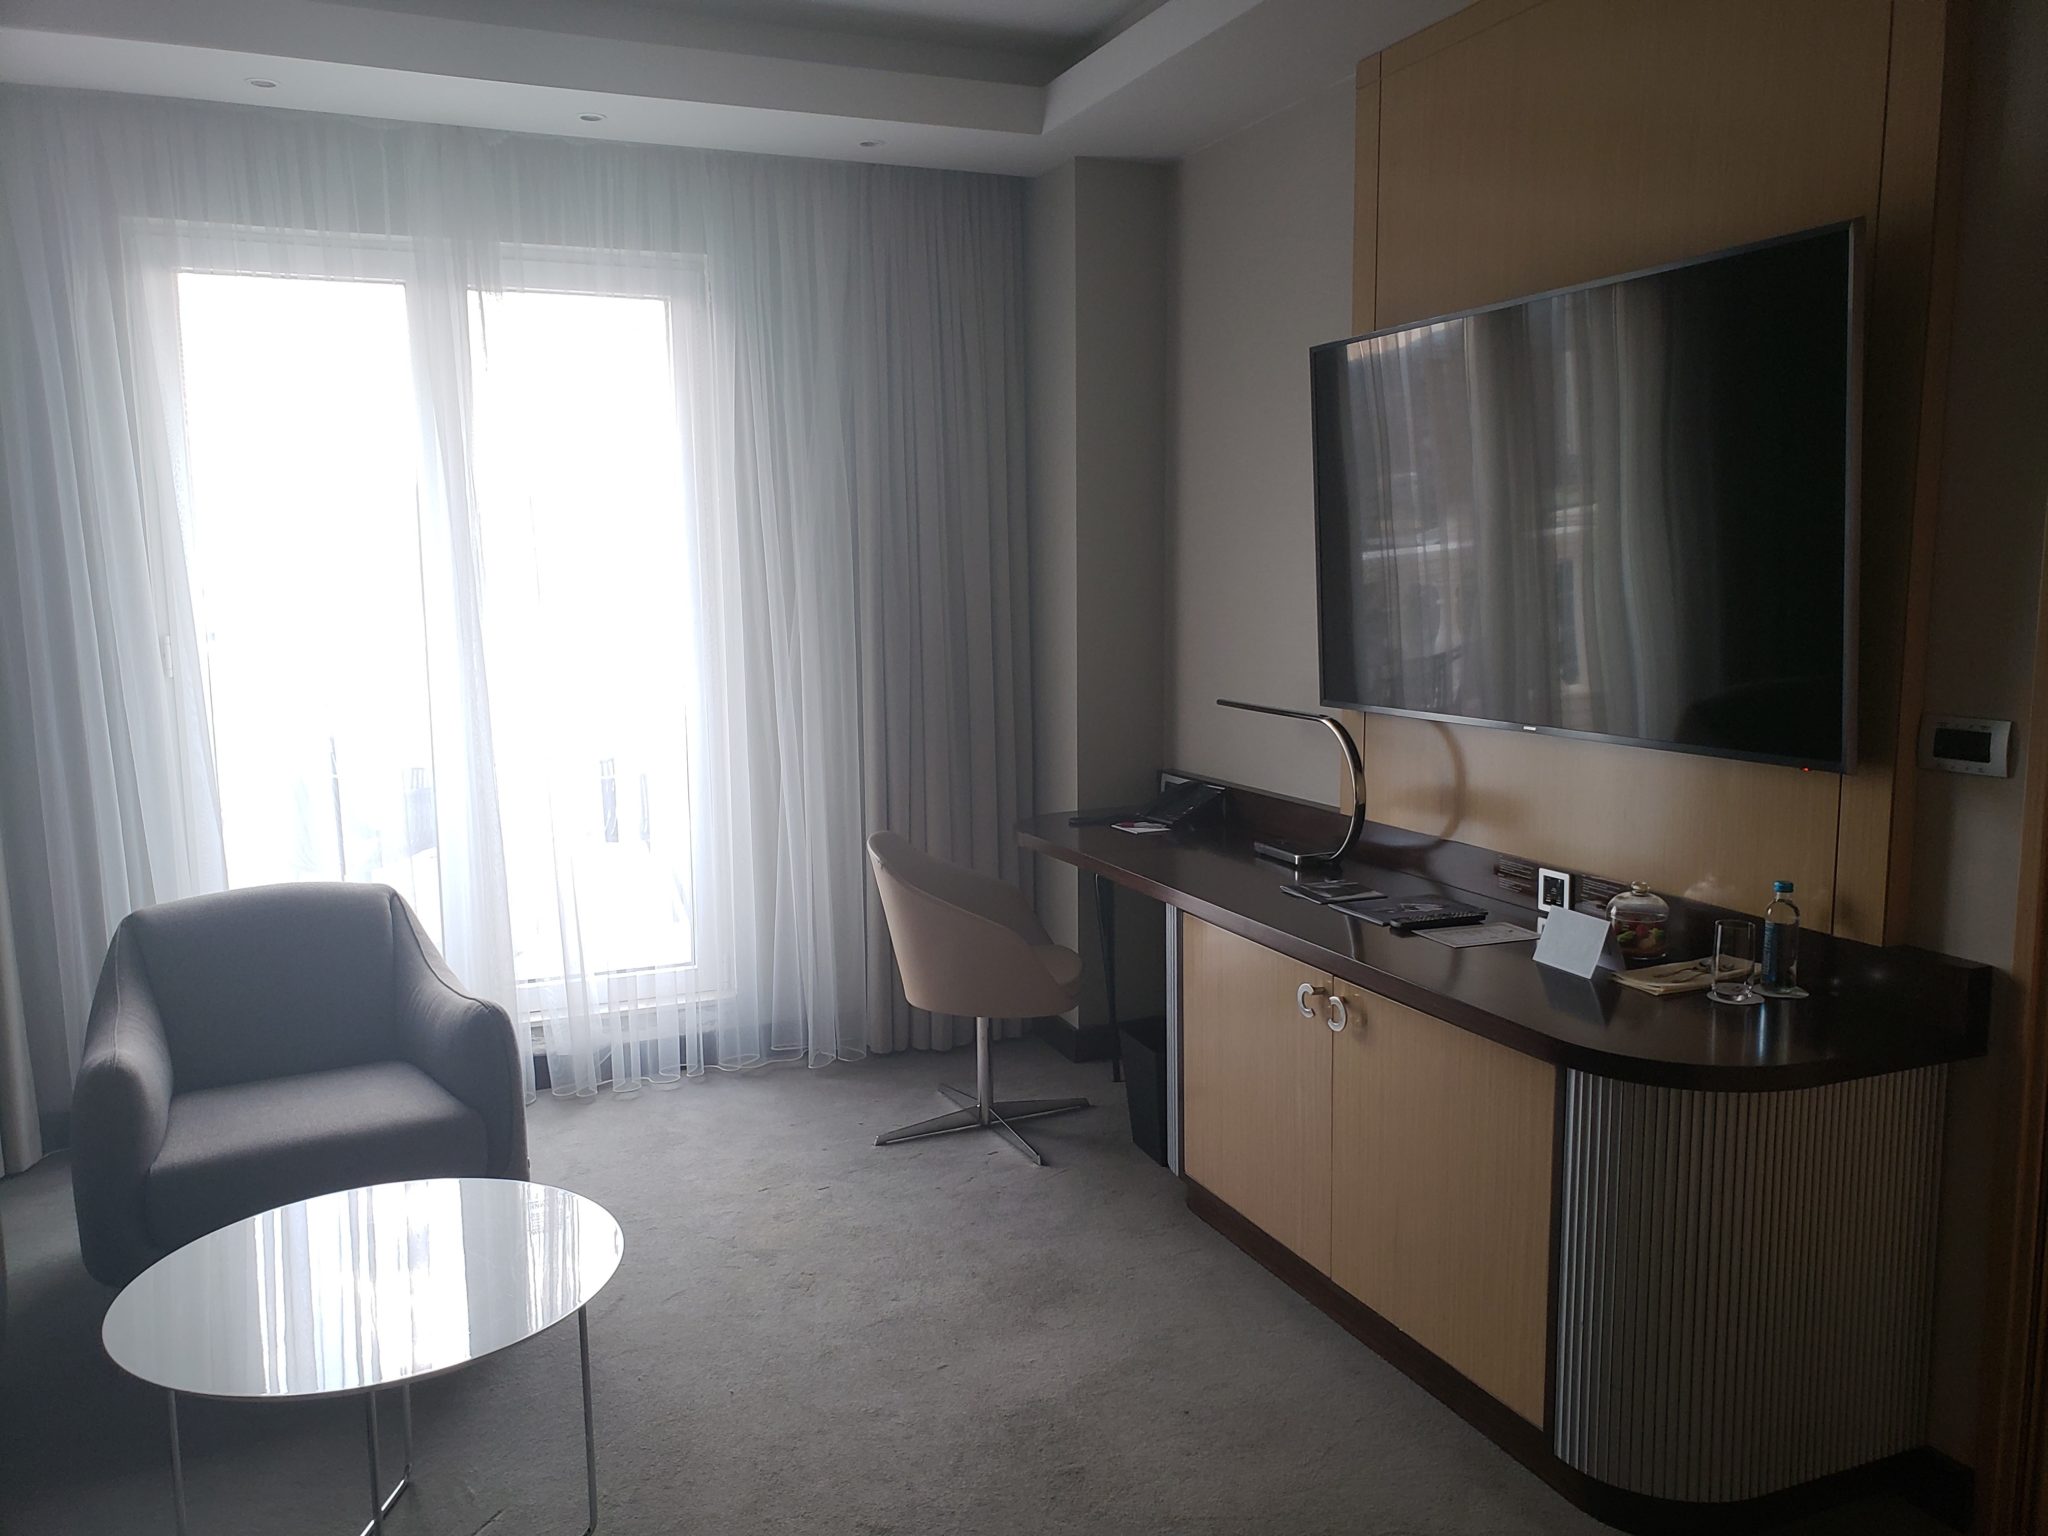 a room with a tv and a chair